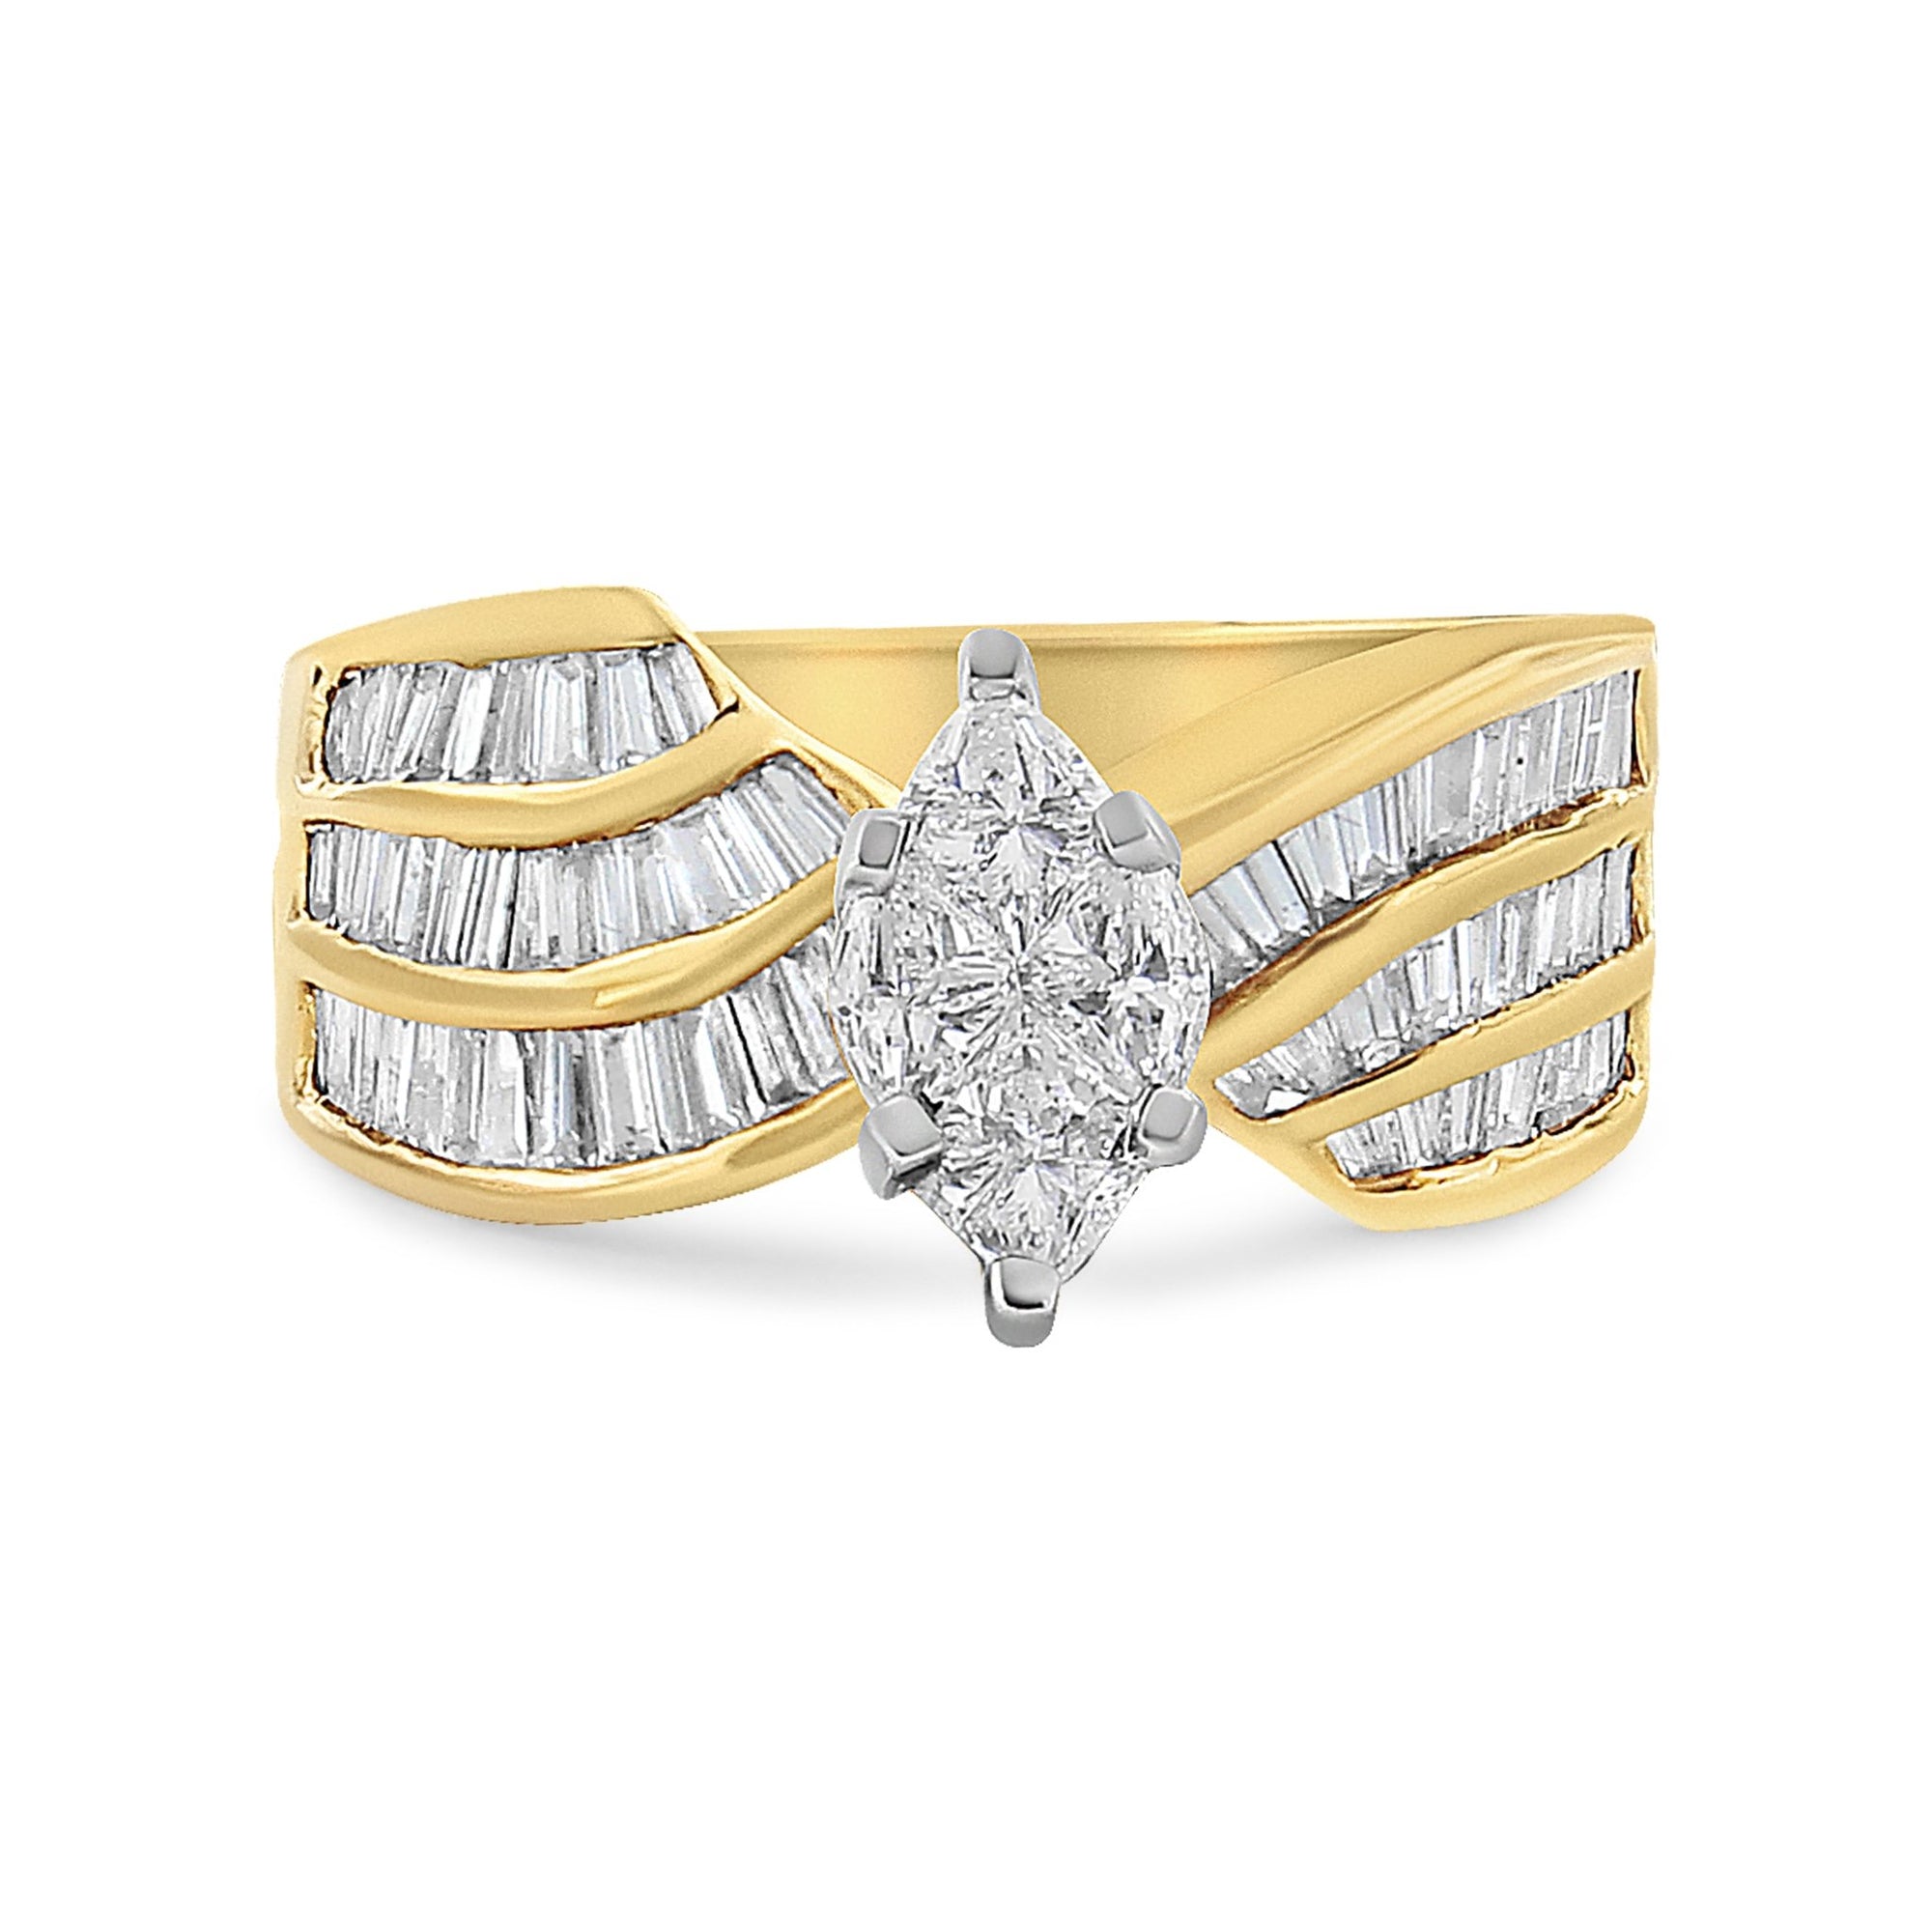 14K White and Yellow Gold 1 1/4 Cttw Pie and Baguette-Cut Diamond Marquise Shape Engagement Bypass Ring (H-I Color, VS1-VS2 Clarity) - Size 7 - LinkagejewelrydesignLinkagejewelrydesign